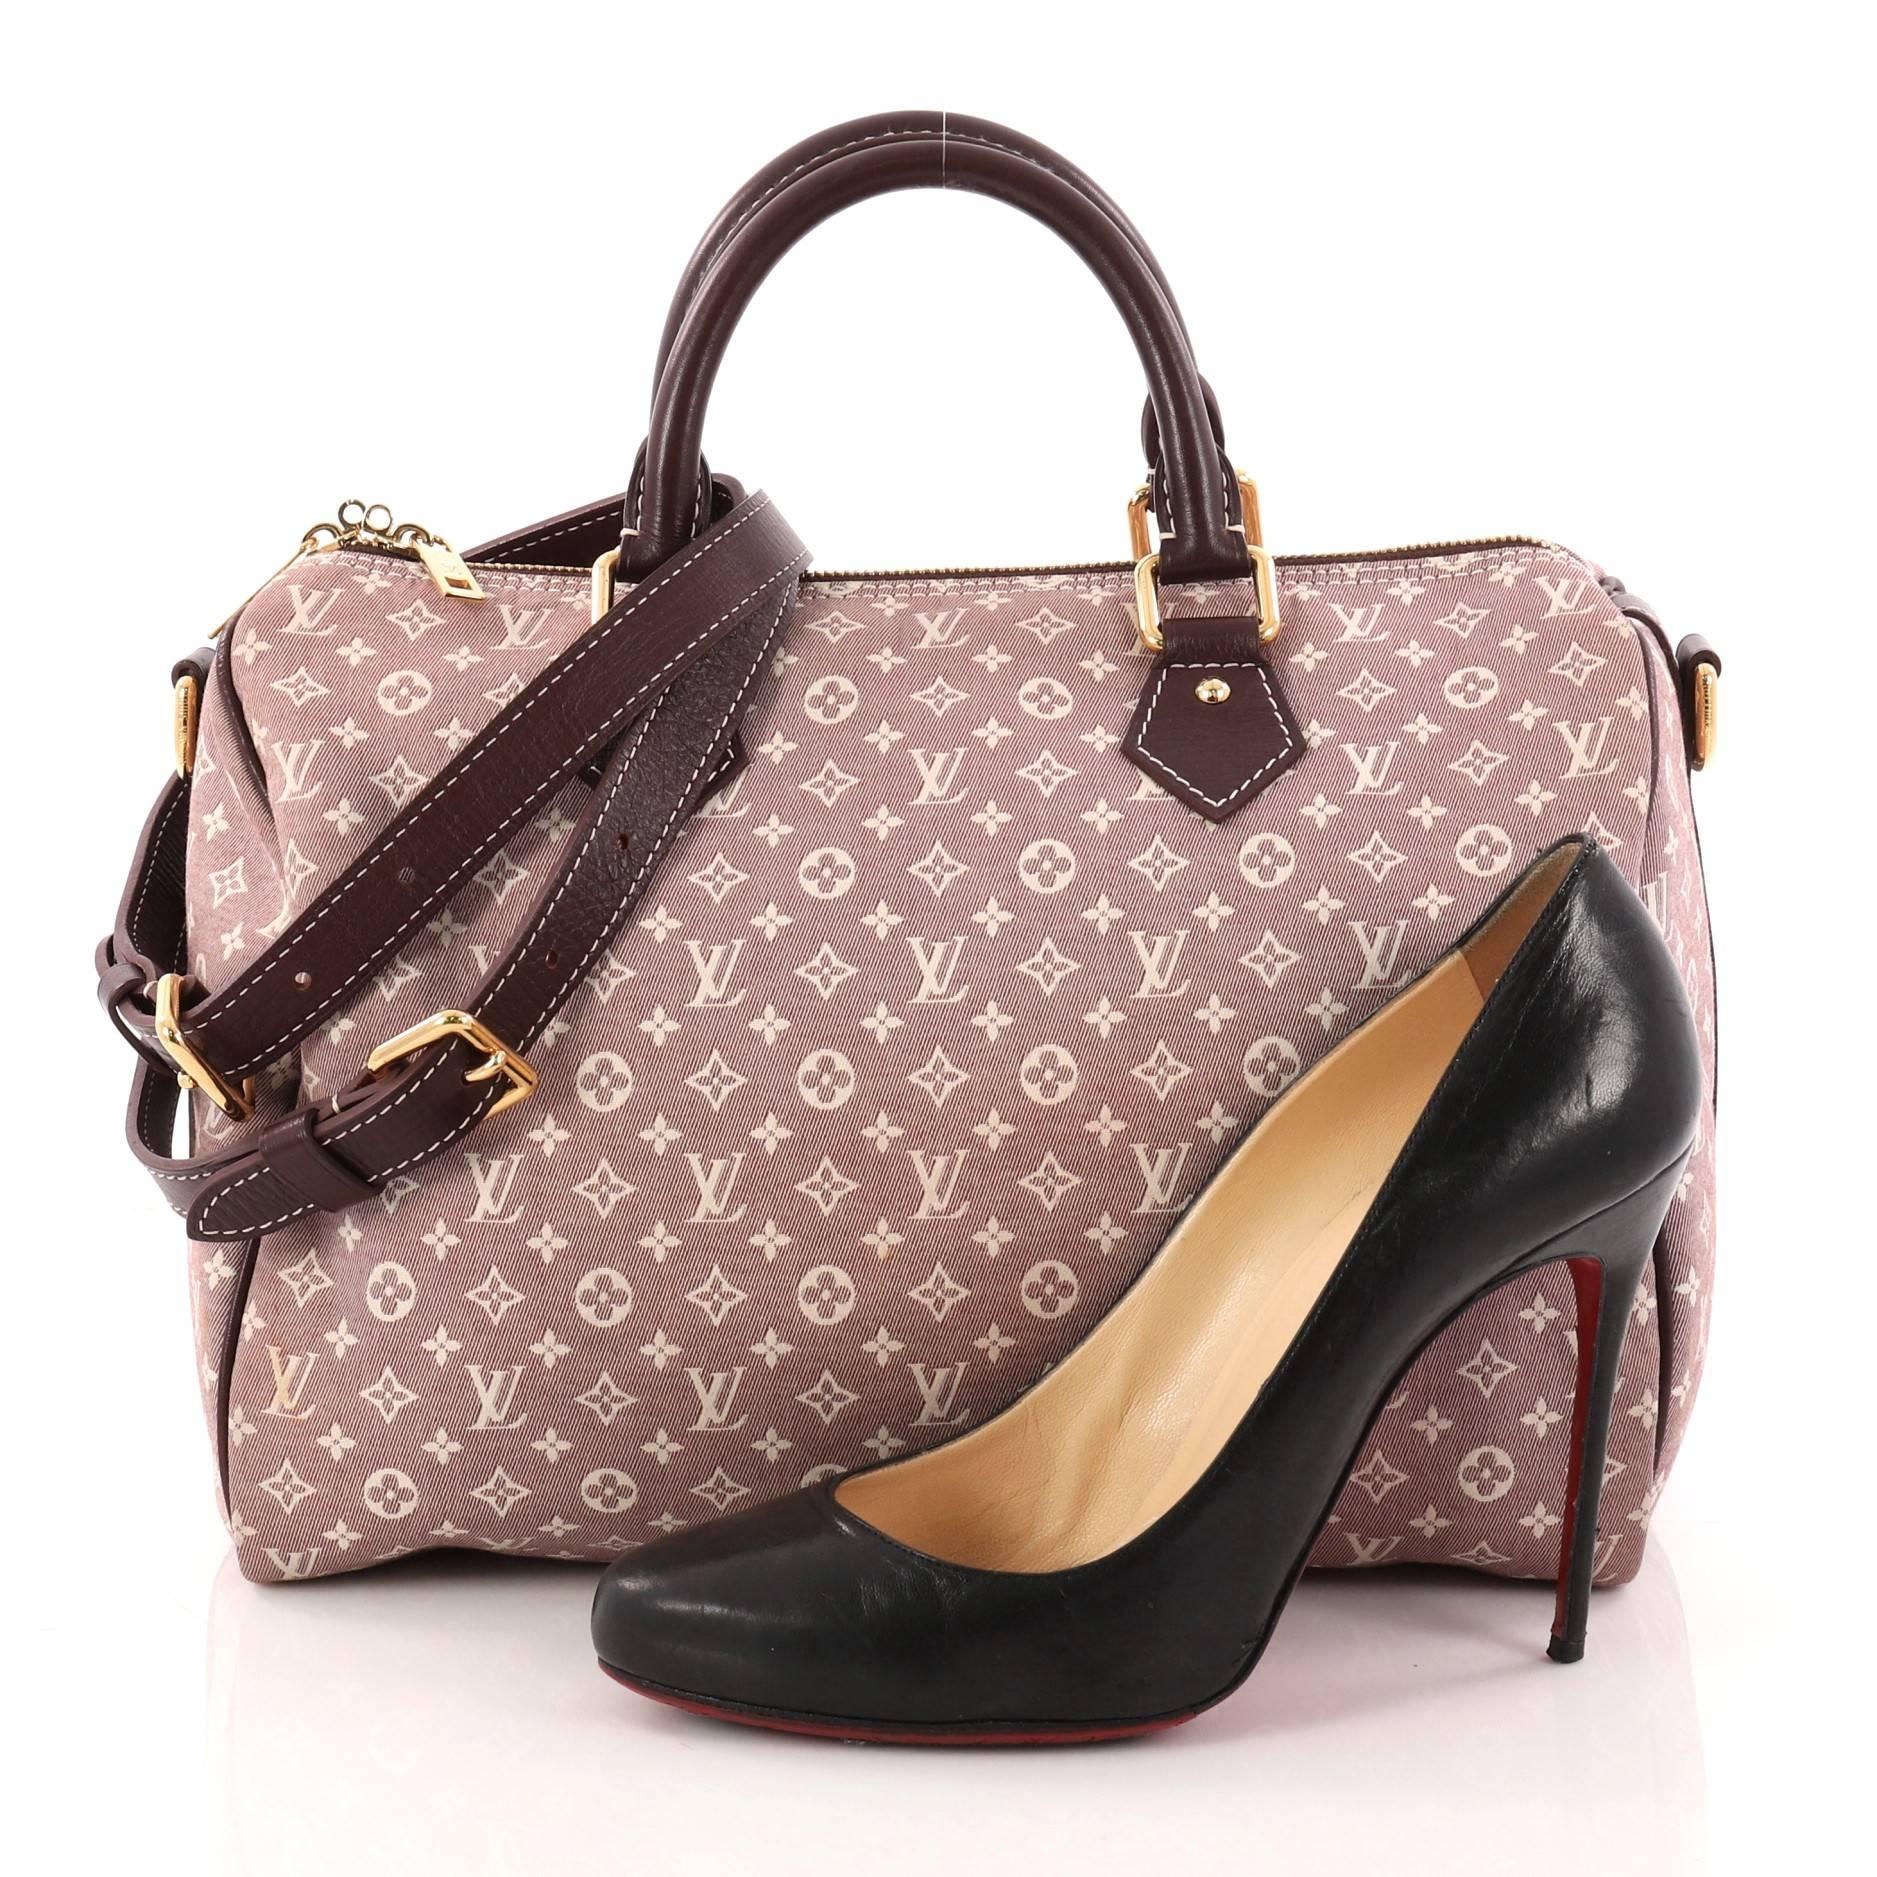 This authentic Louis Vuitton Speedy Bandouliere Bag Monogram Idylle 30 is a classic must-have. Constructed from Louis Vuitton's burgundy idylle monogram canvas, this fresh Speedy features dual rolled top handles, leather trims, and gold-tone